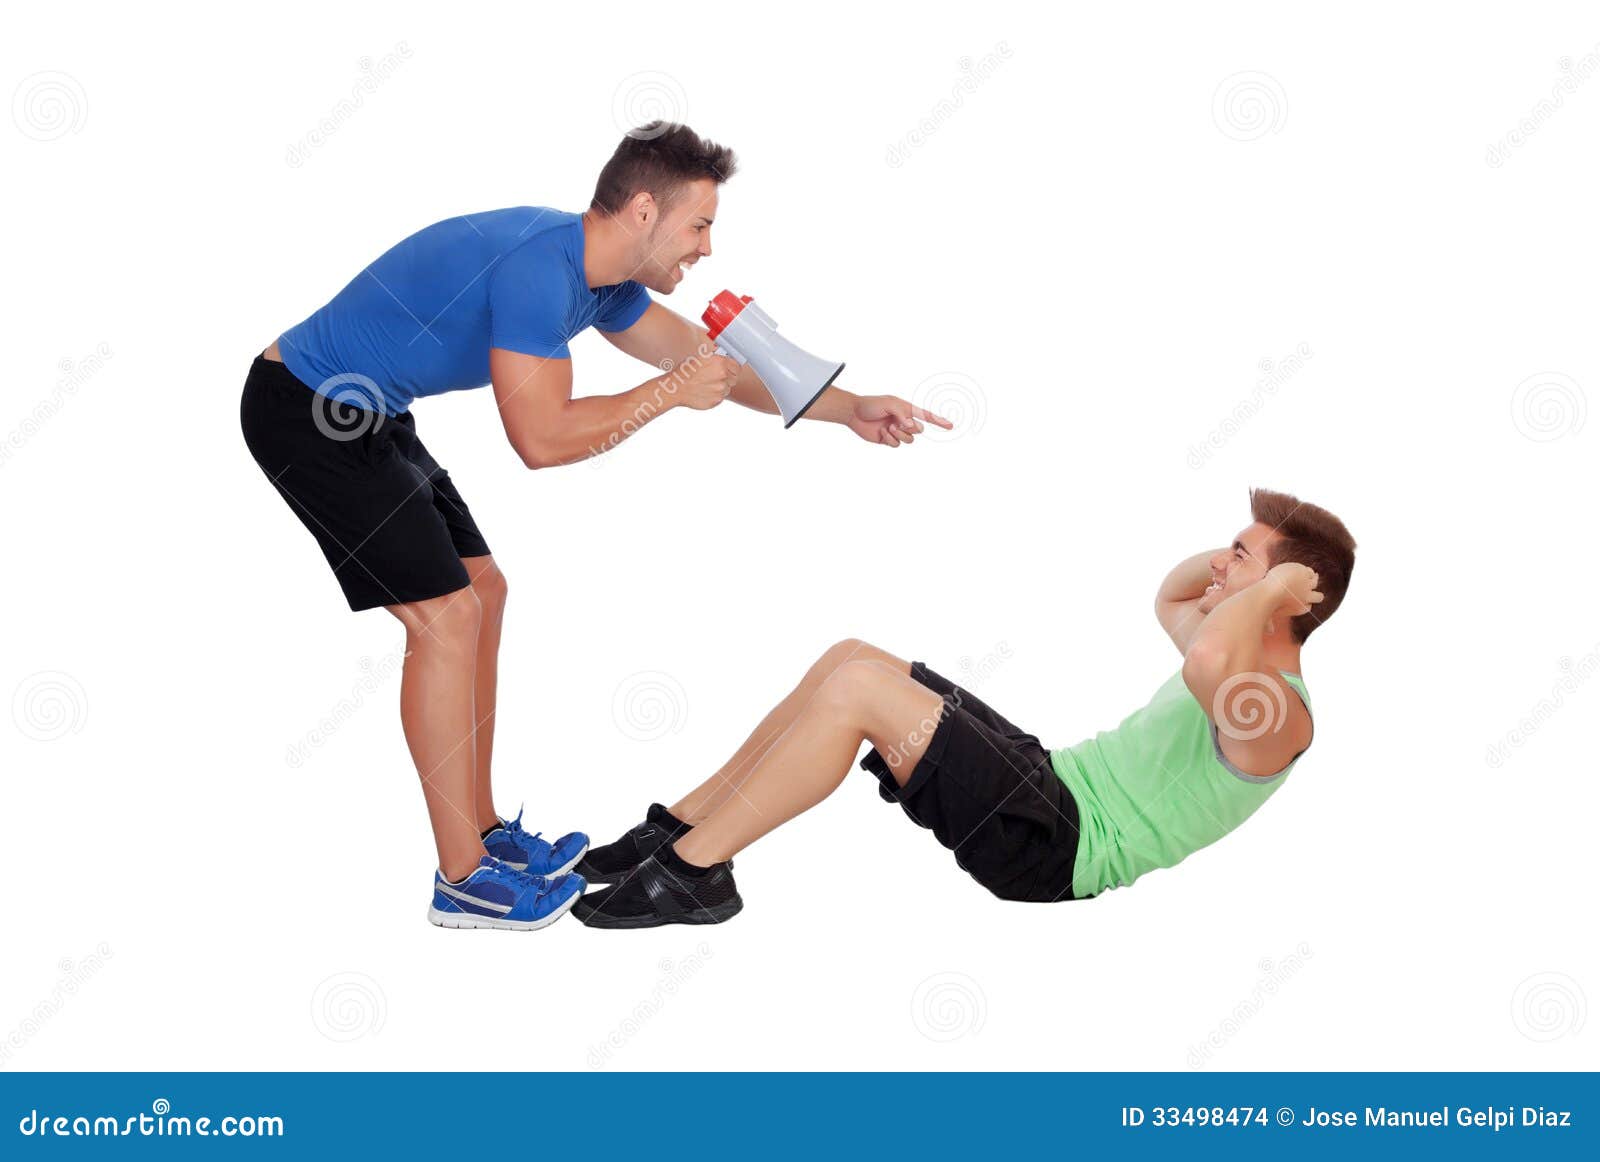 fitness trainer clipart - photo #9